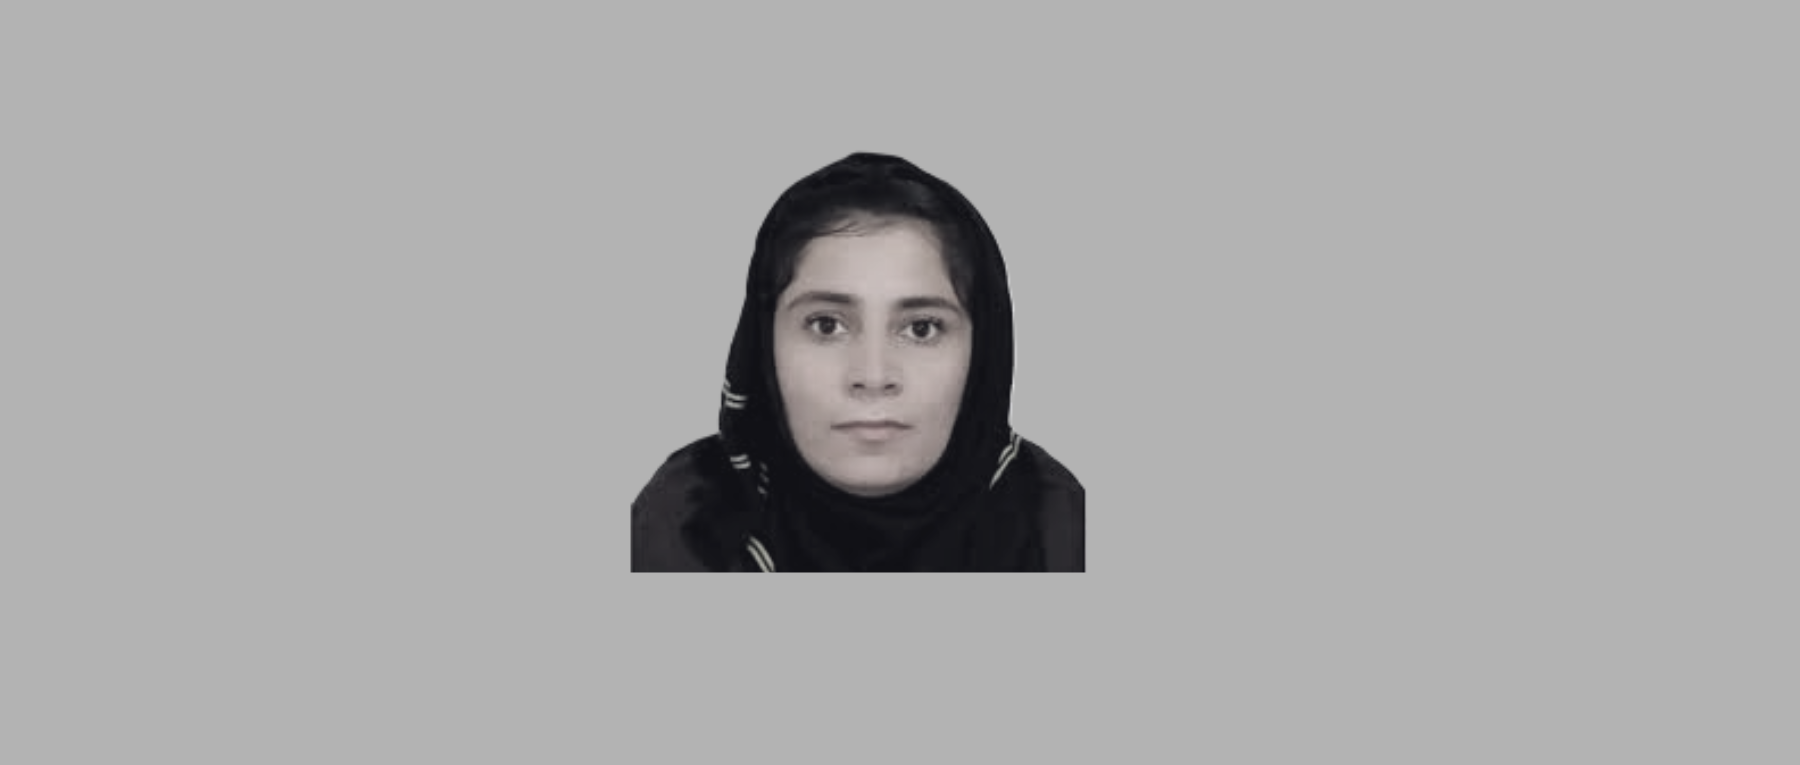 Urgent Action: Afghanistan – Release Manizha Seddiqi from detention now